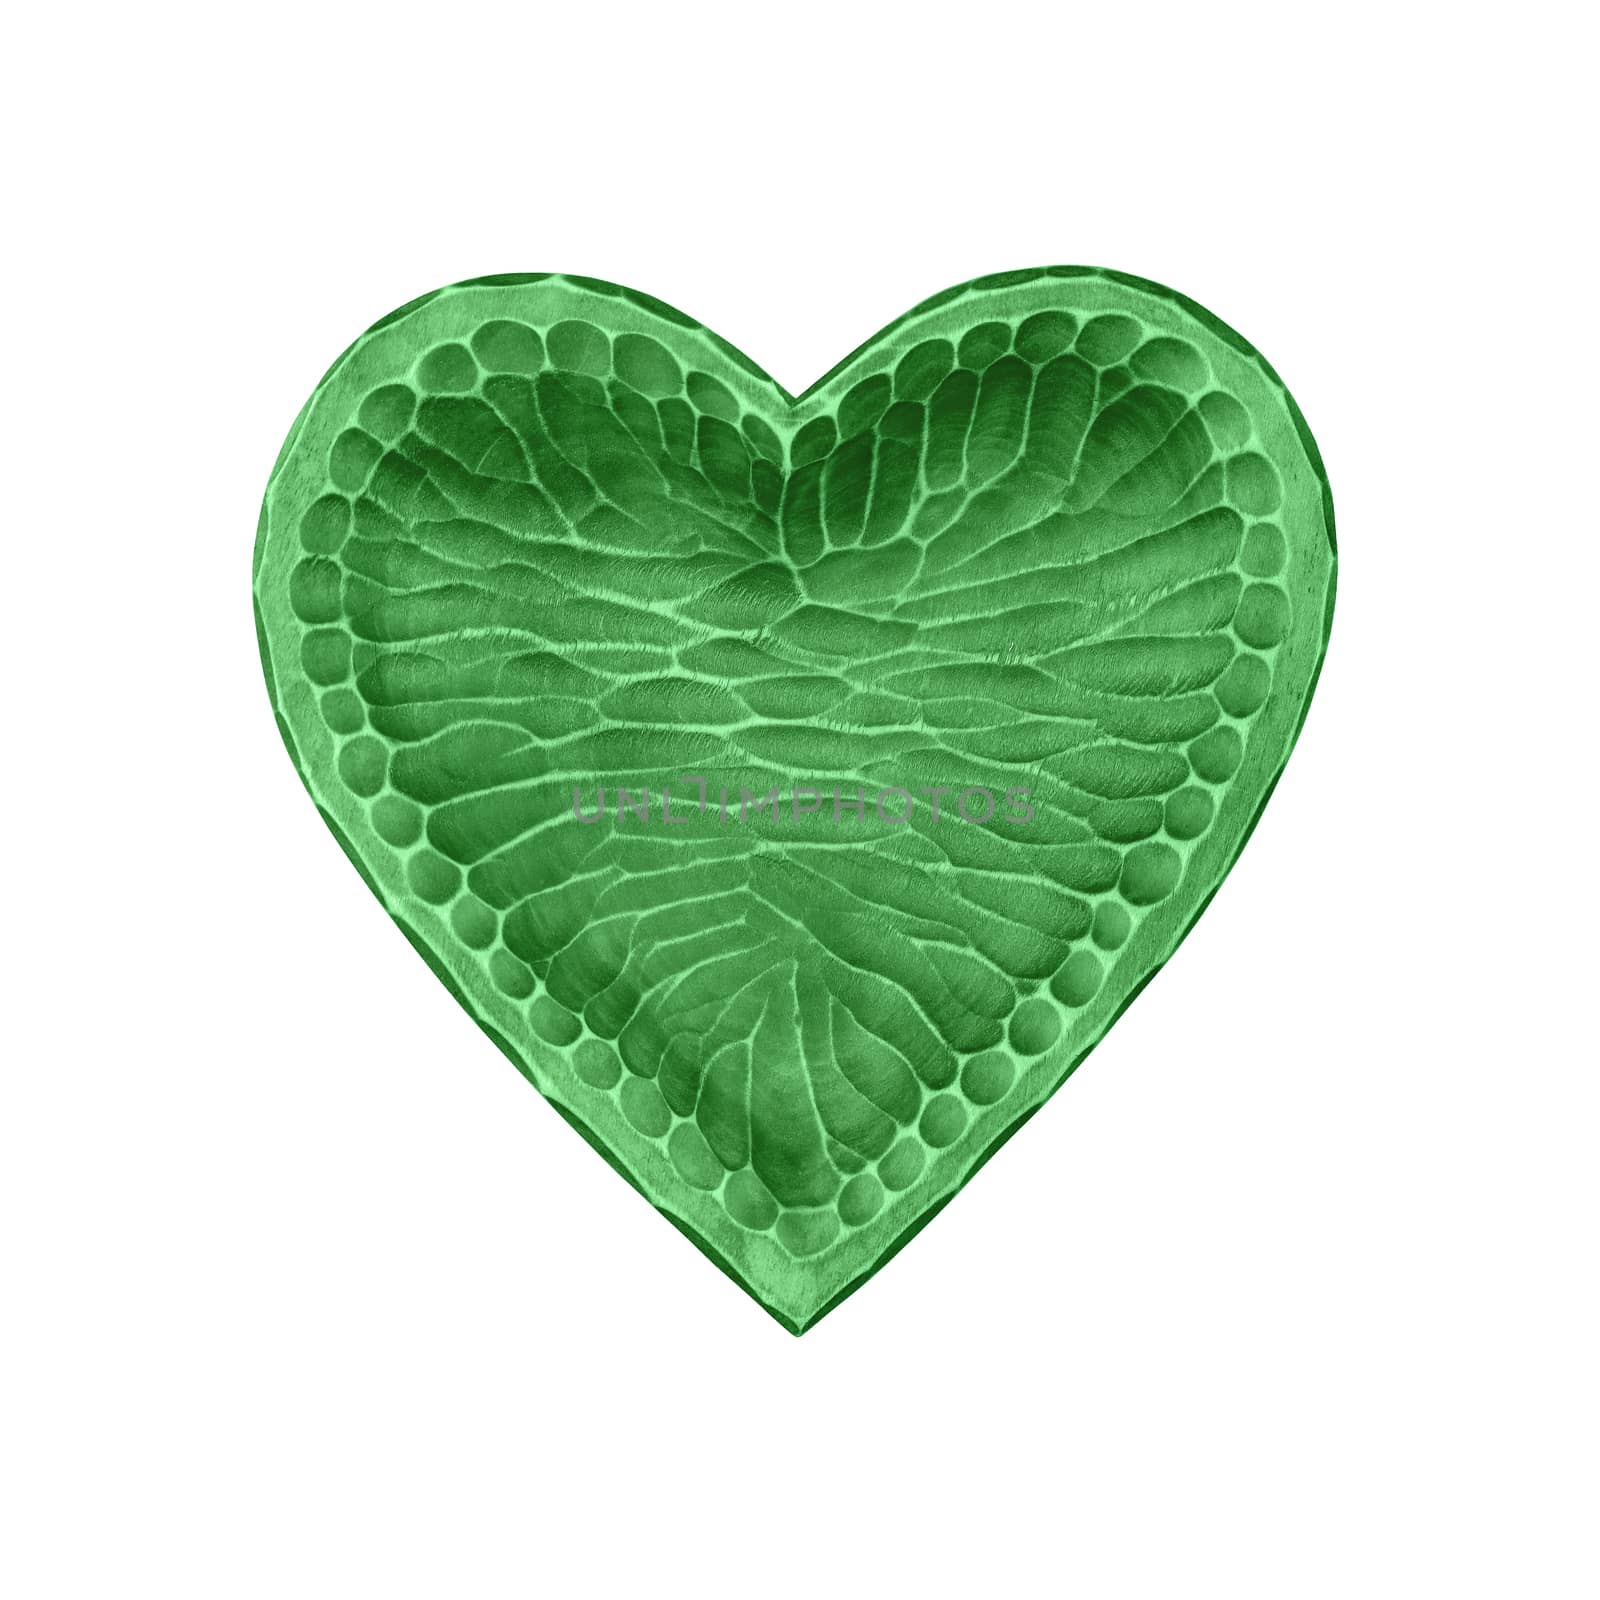 Green wooden heart shaped bowl isolated on white by BreakingTheWalls